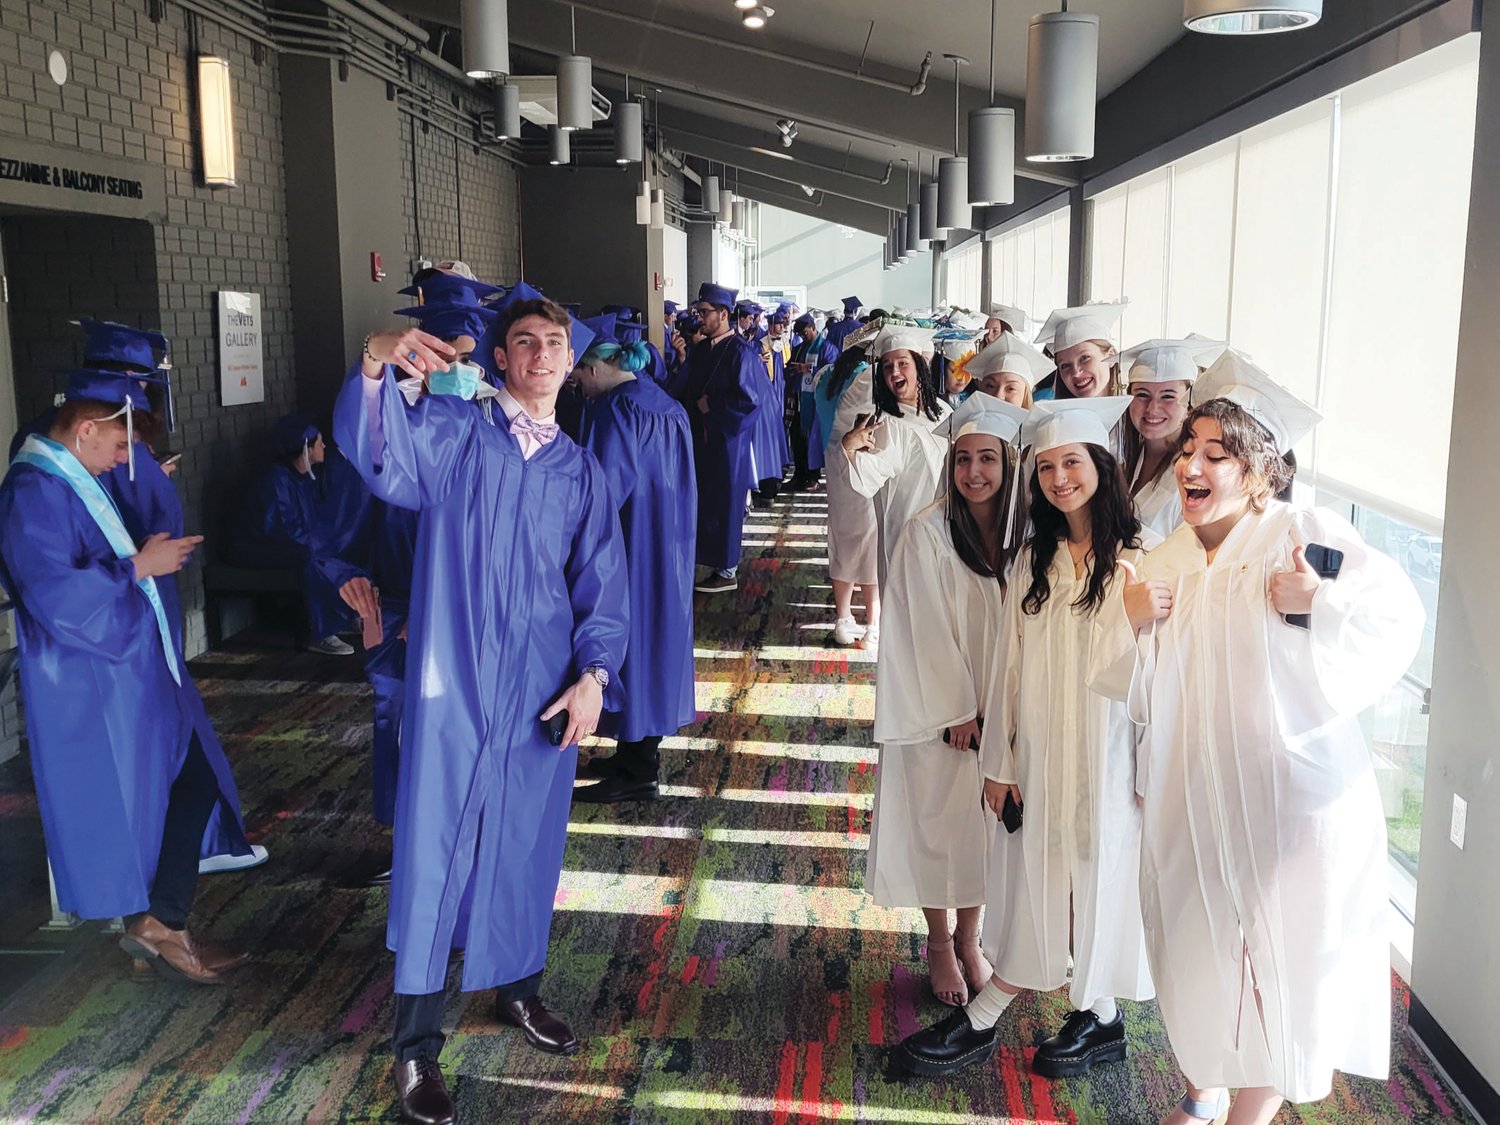 ANXIOUS GRADS: The Johnston Senior High School Class of 2022 lined up in a hallway behind the scenes of the ceremony held Friday at Veterans Memorial Auditorium in Providence.